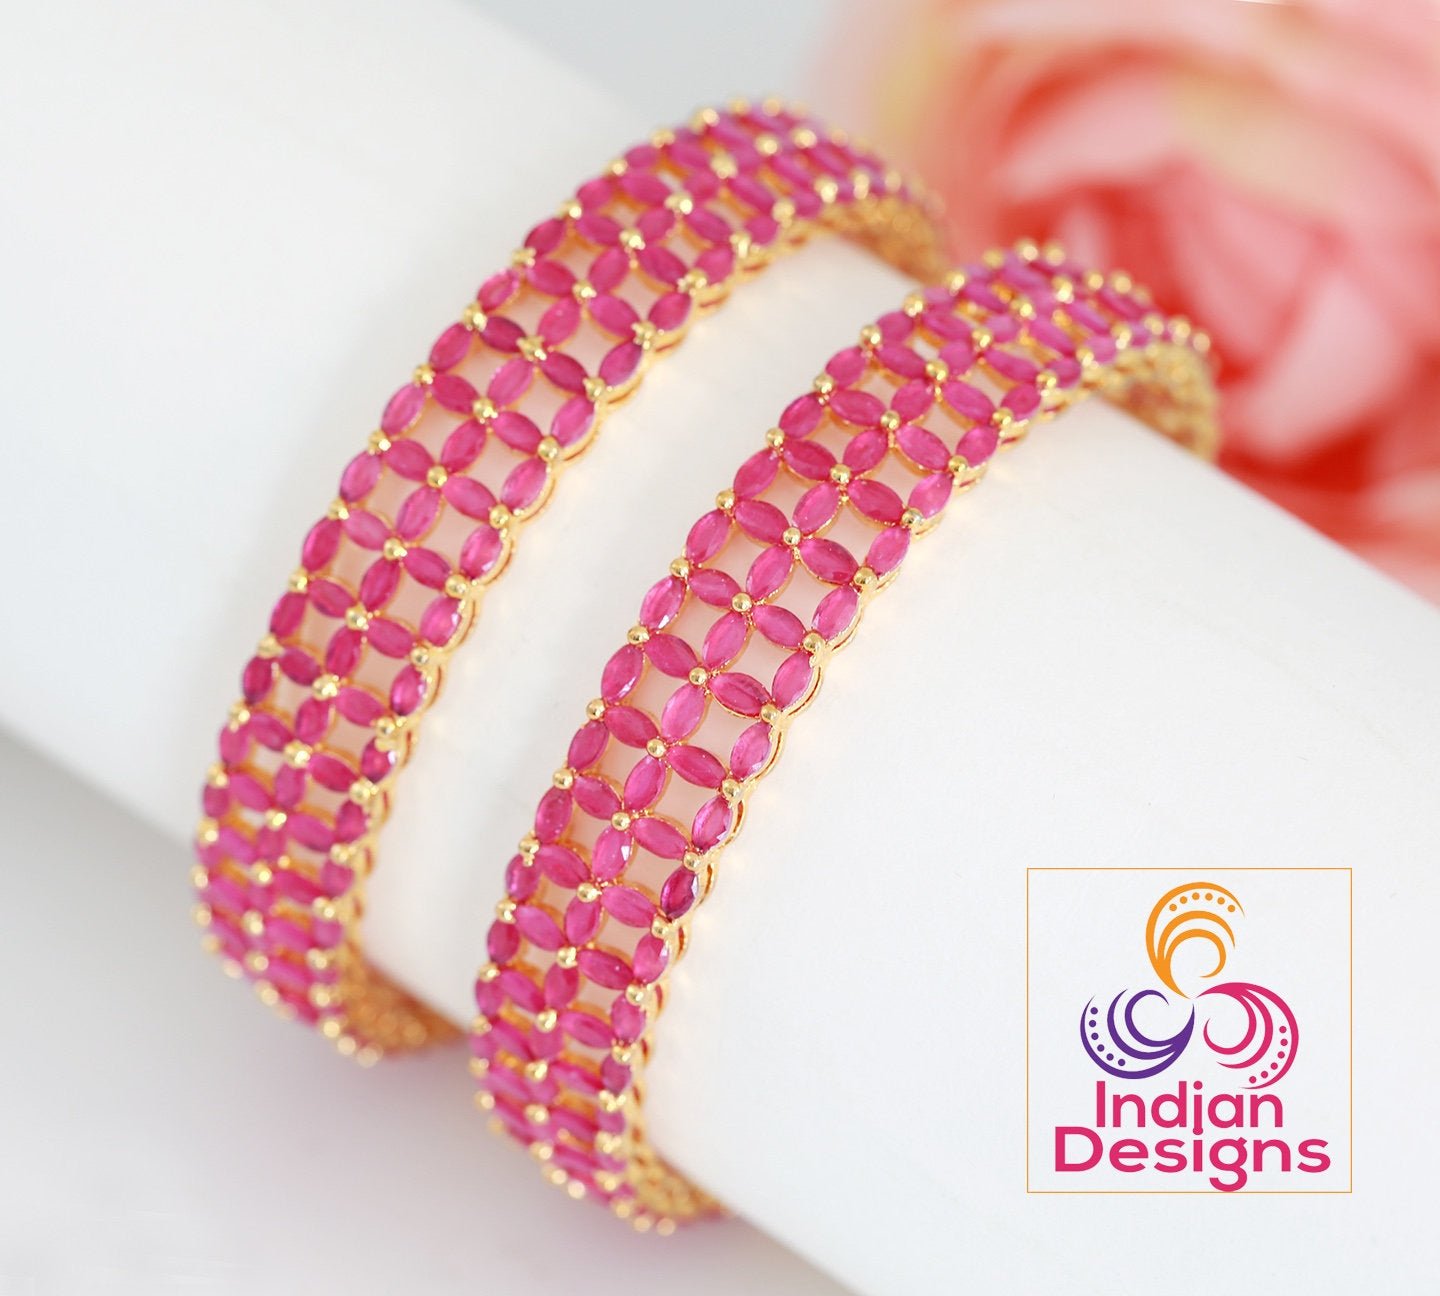 Golden American Diamond unique Design bangles studded with marquise cut Ruby stones |Bollywood Party wear Fashion Designer Bangles set of 2